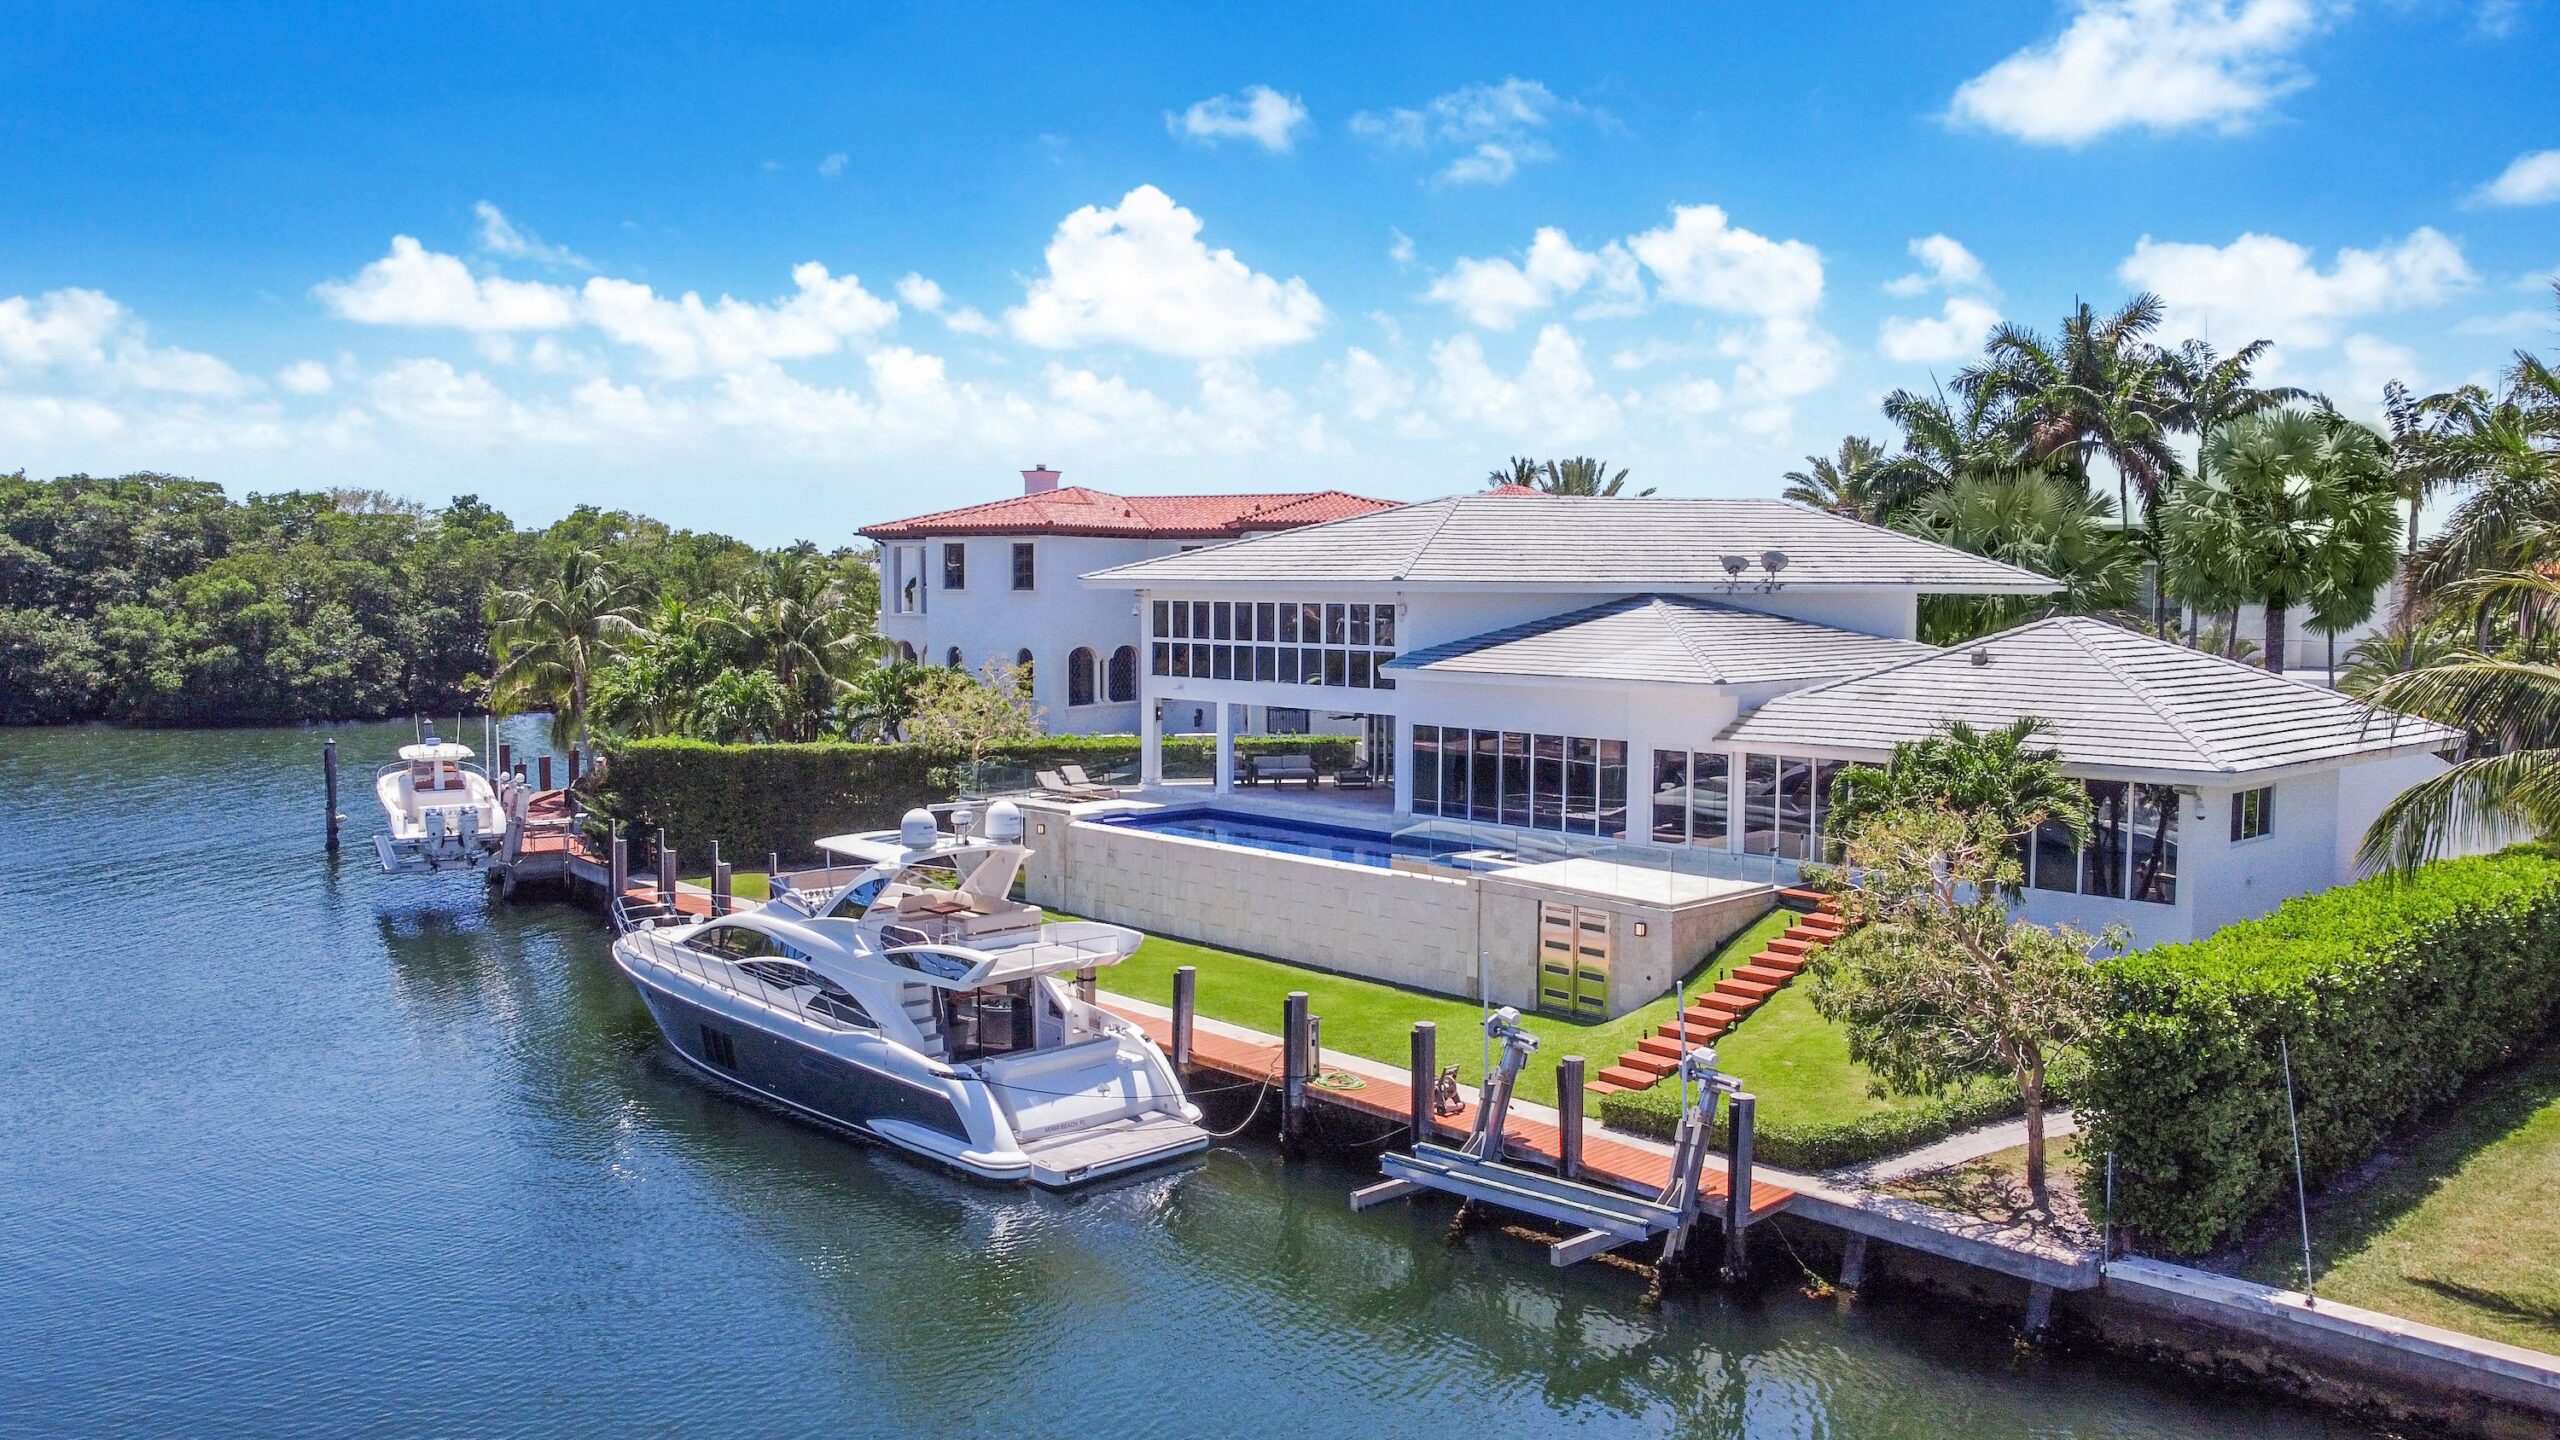 A luxurious waterfront property featuring a large modern house with a white exterior, expansive windows, and a spacious outdoor pool. This best real estate investment offers a private dock with boats moored, set against lush greenery and a serene waterway under a bright blue sky. | MONEY6X